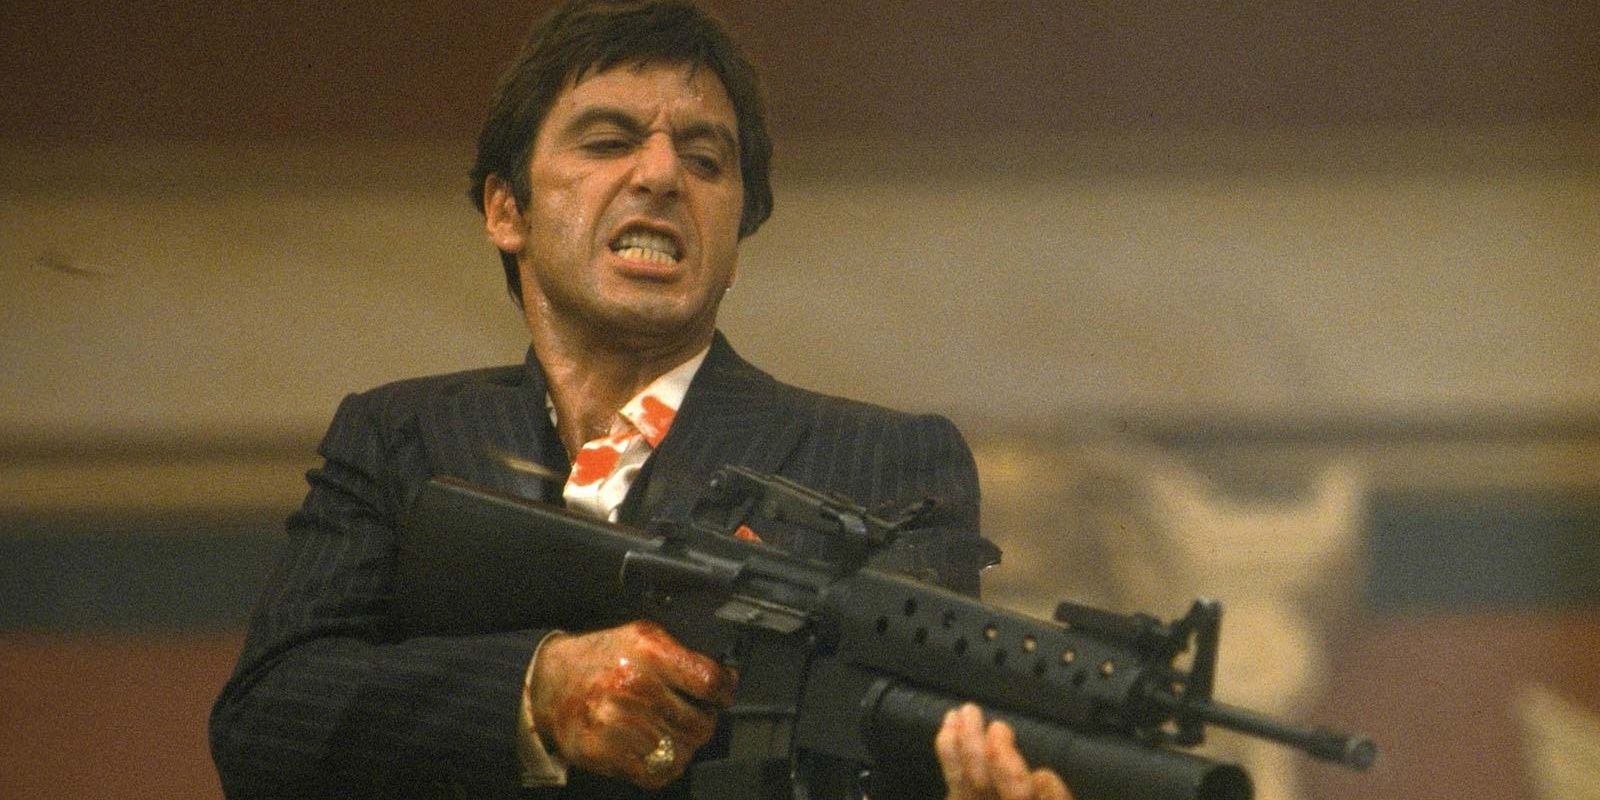 10 Gangster Movies Ranked From Glamorous To Brutal